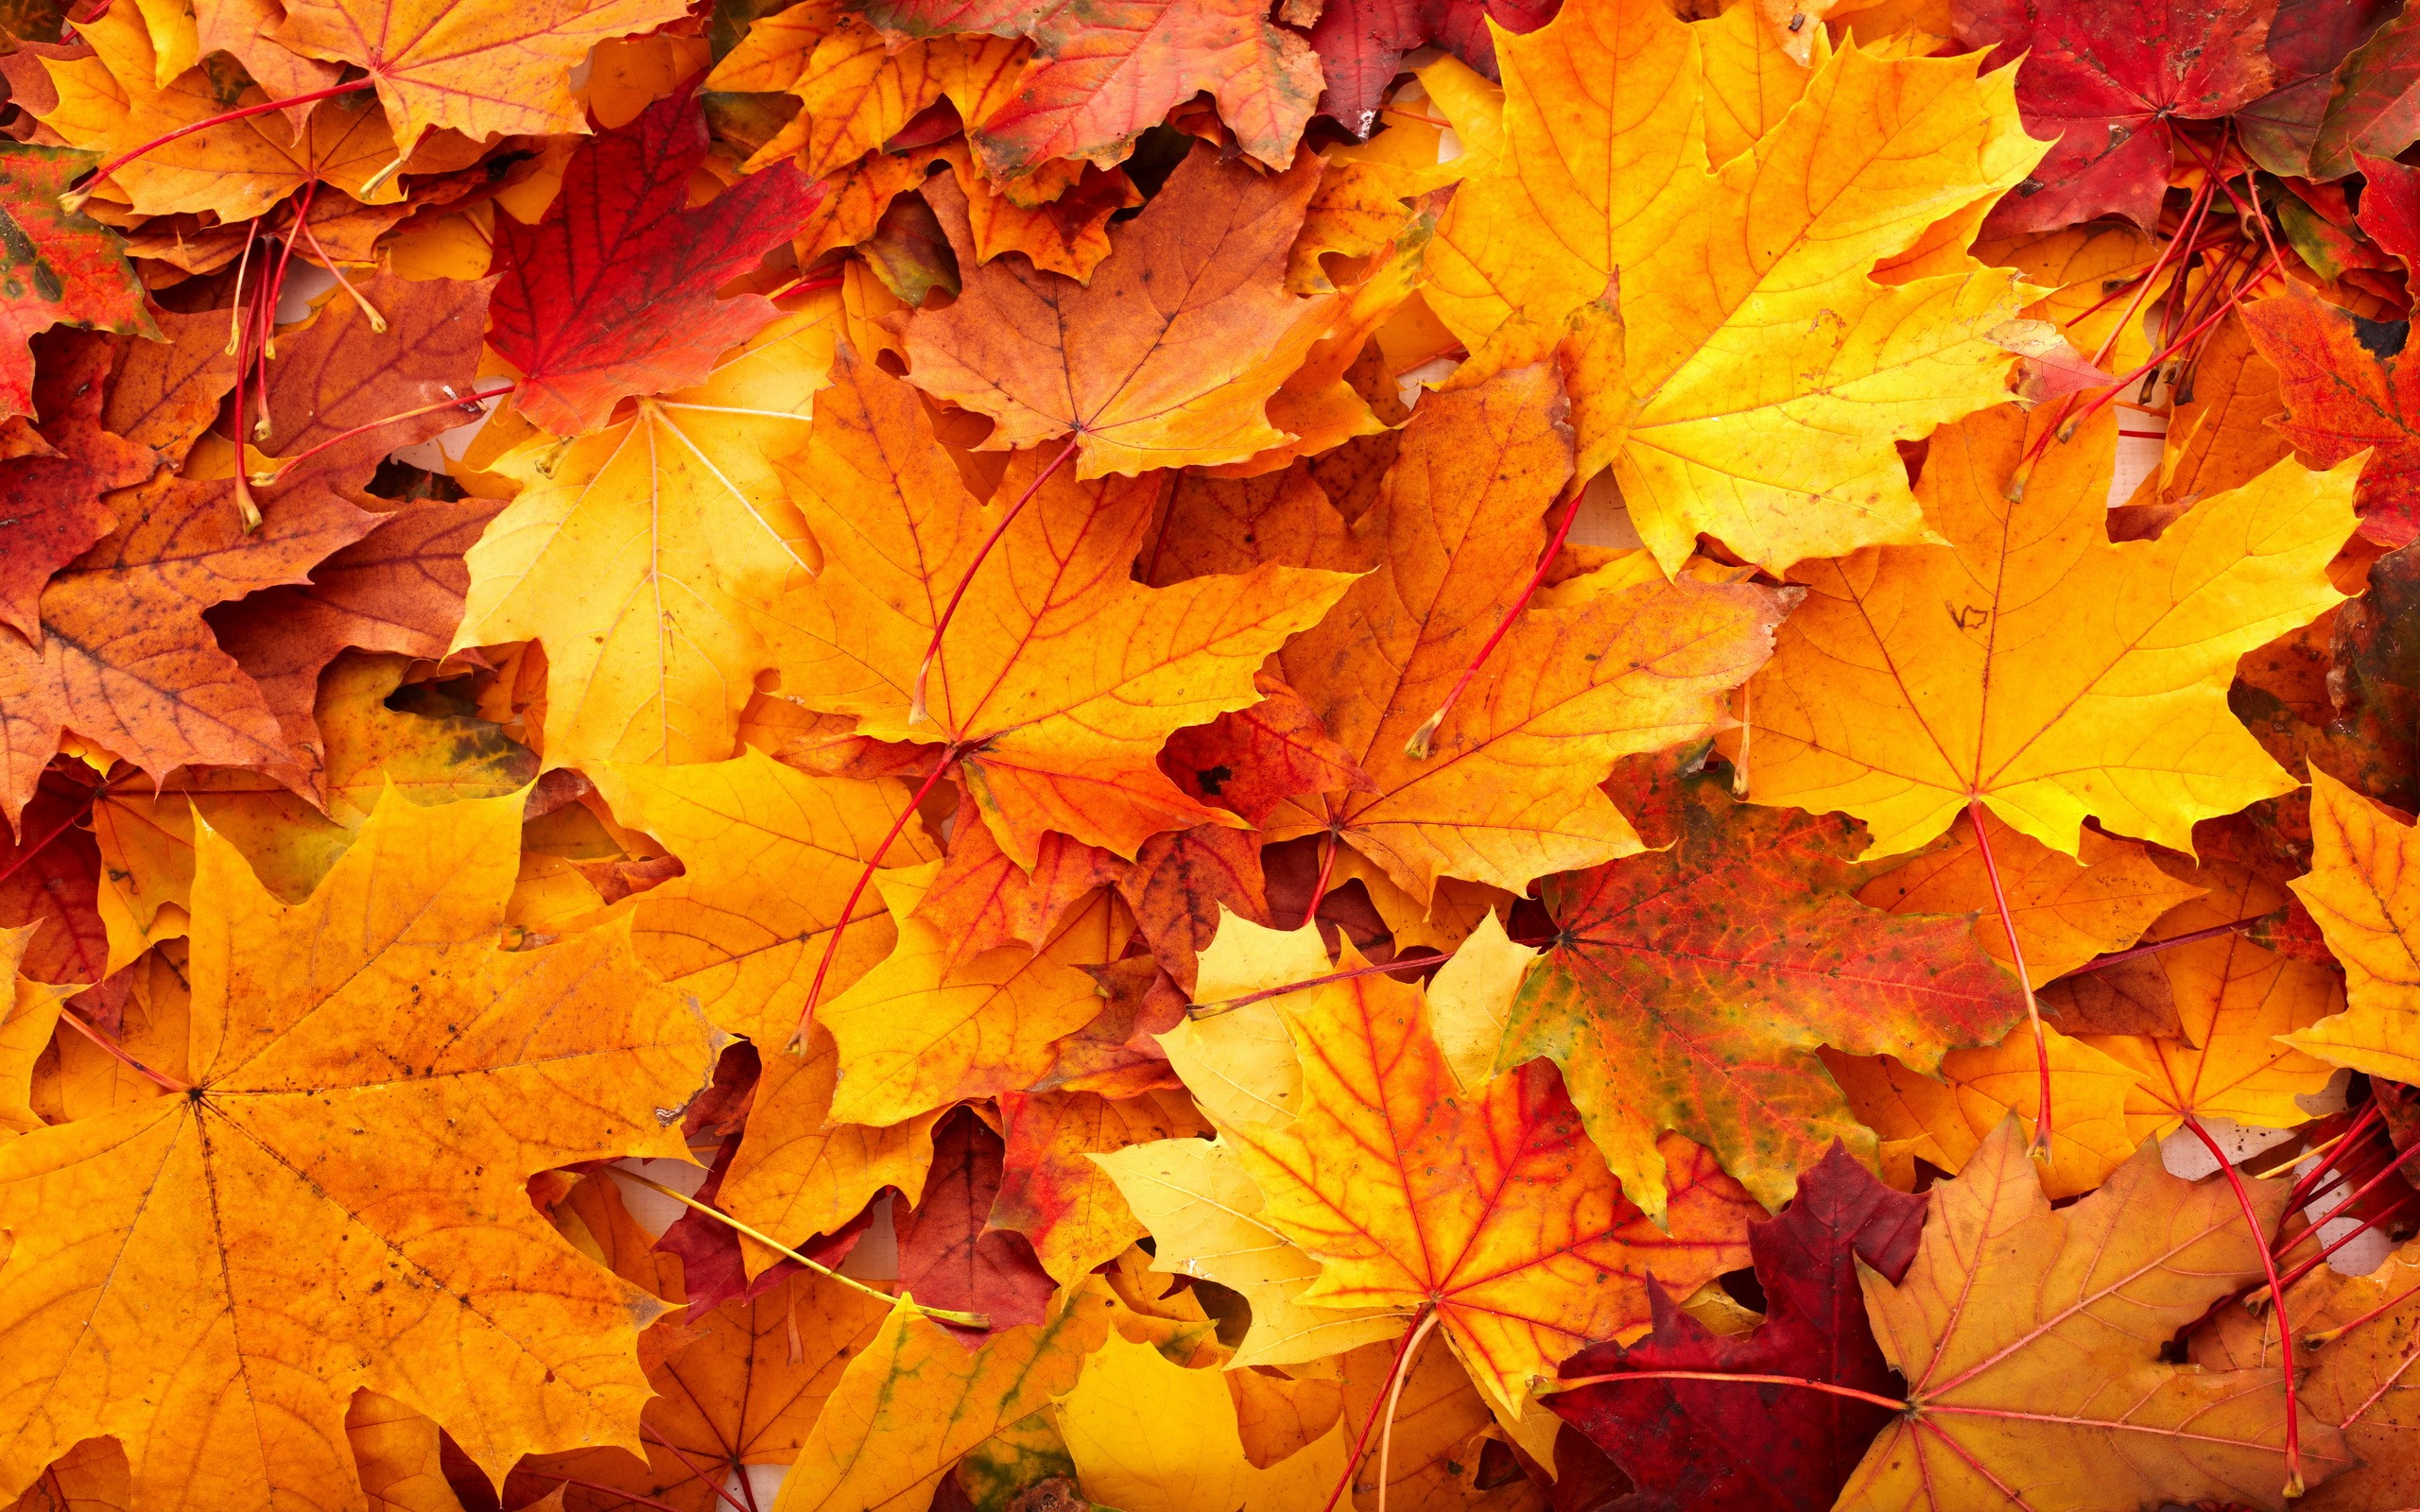 General 2560x1600 leaves fall fallen leaves red leaves plants closeup